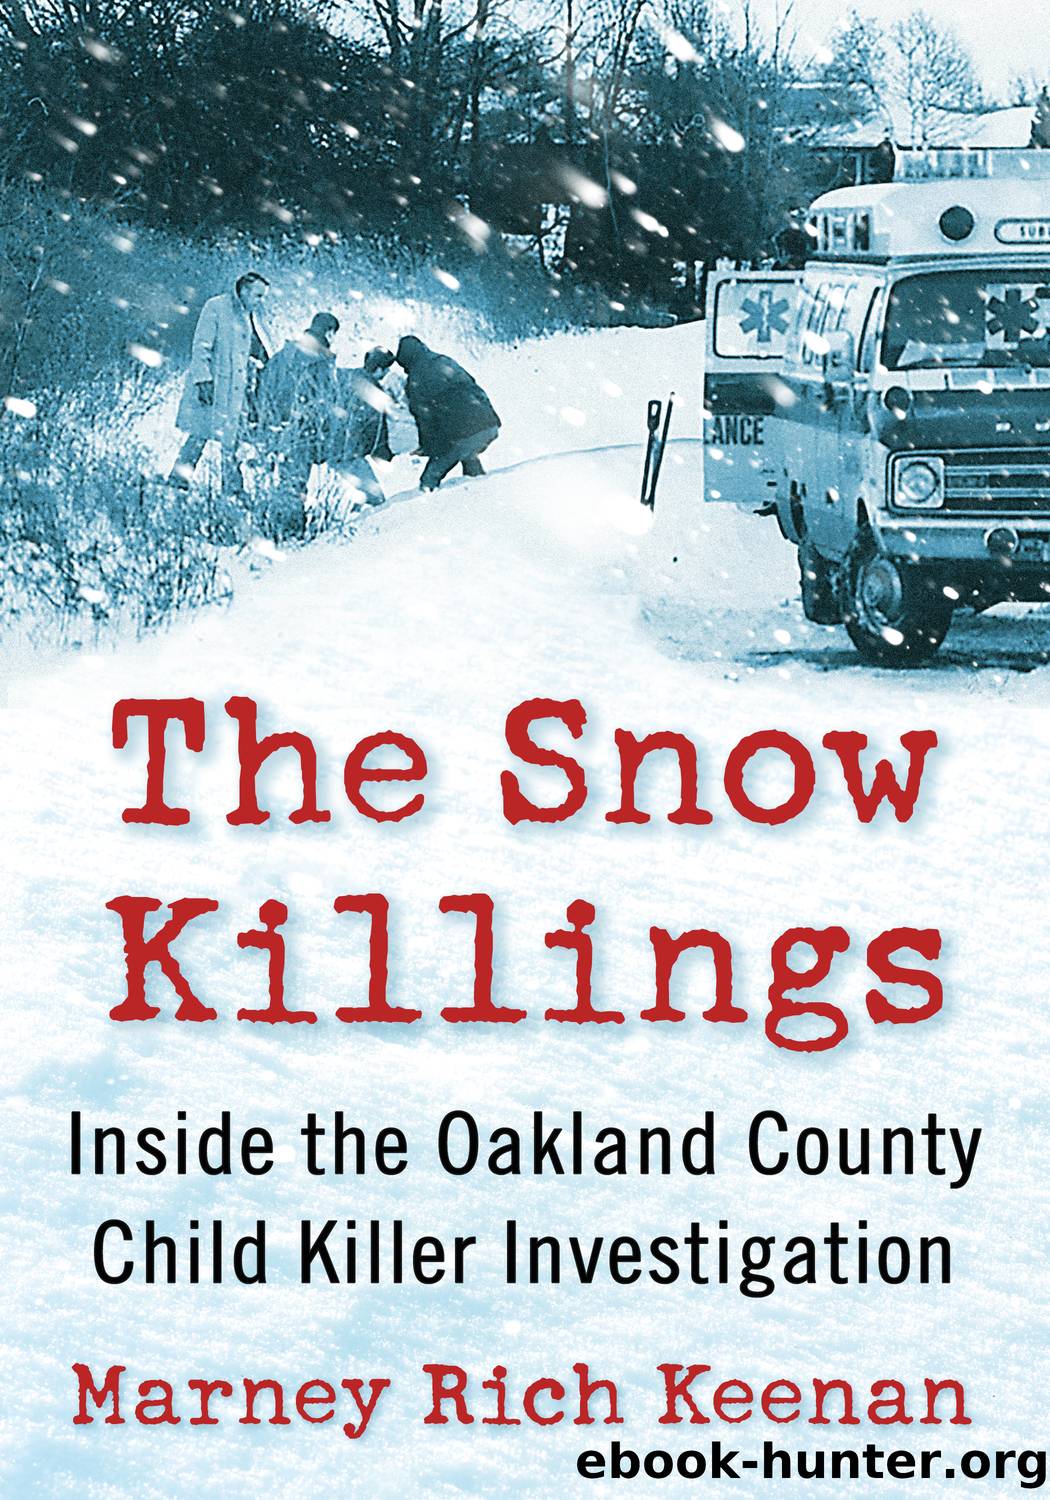 The Snow Killings by Marney Rich Keenan